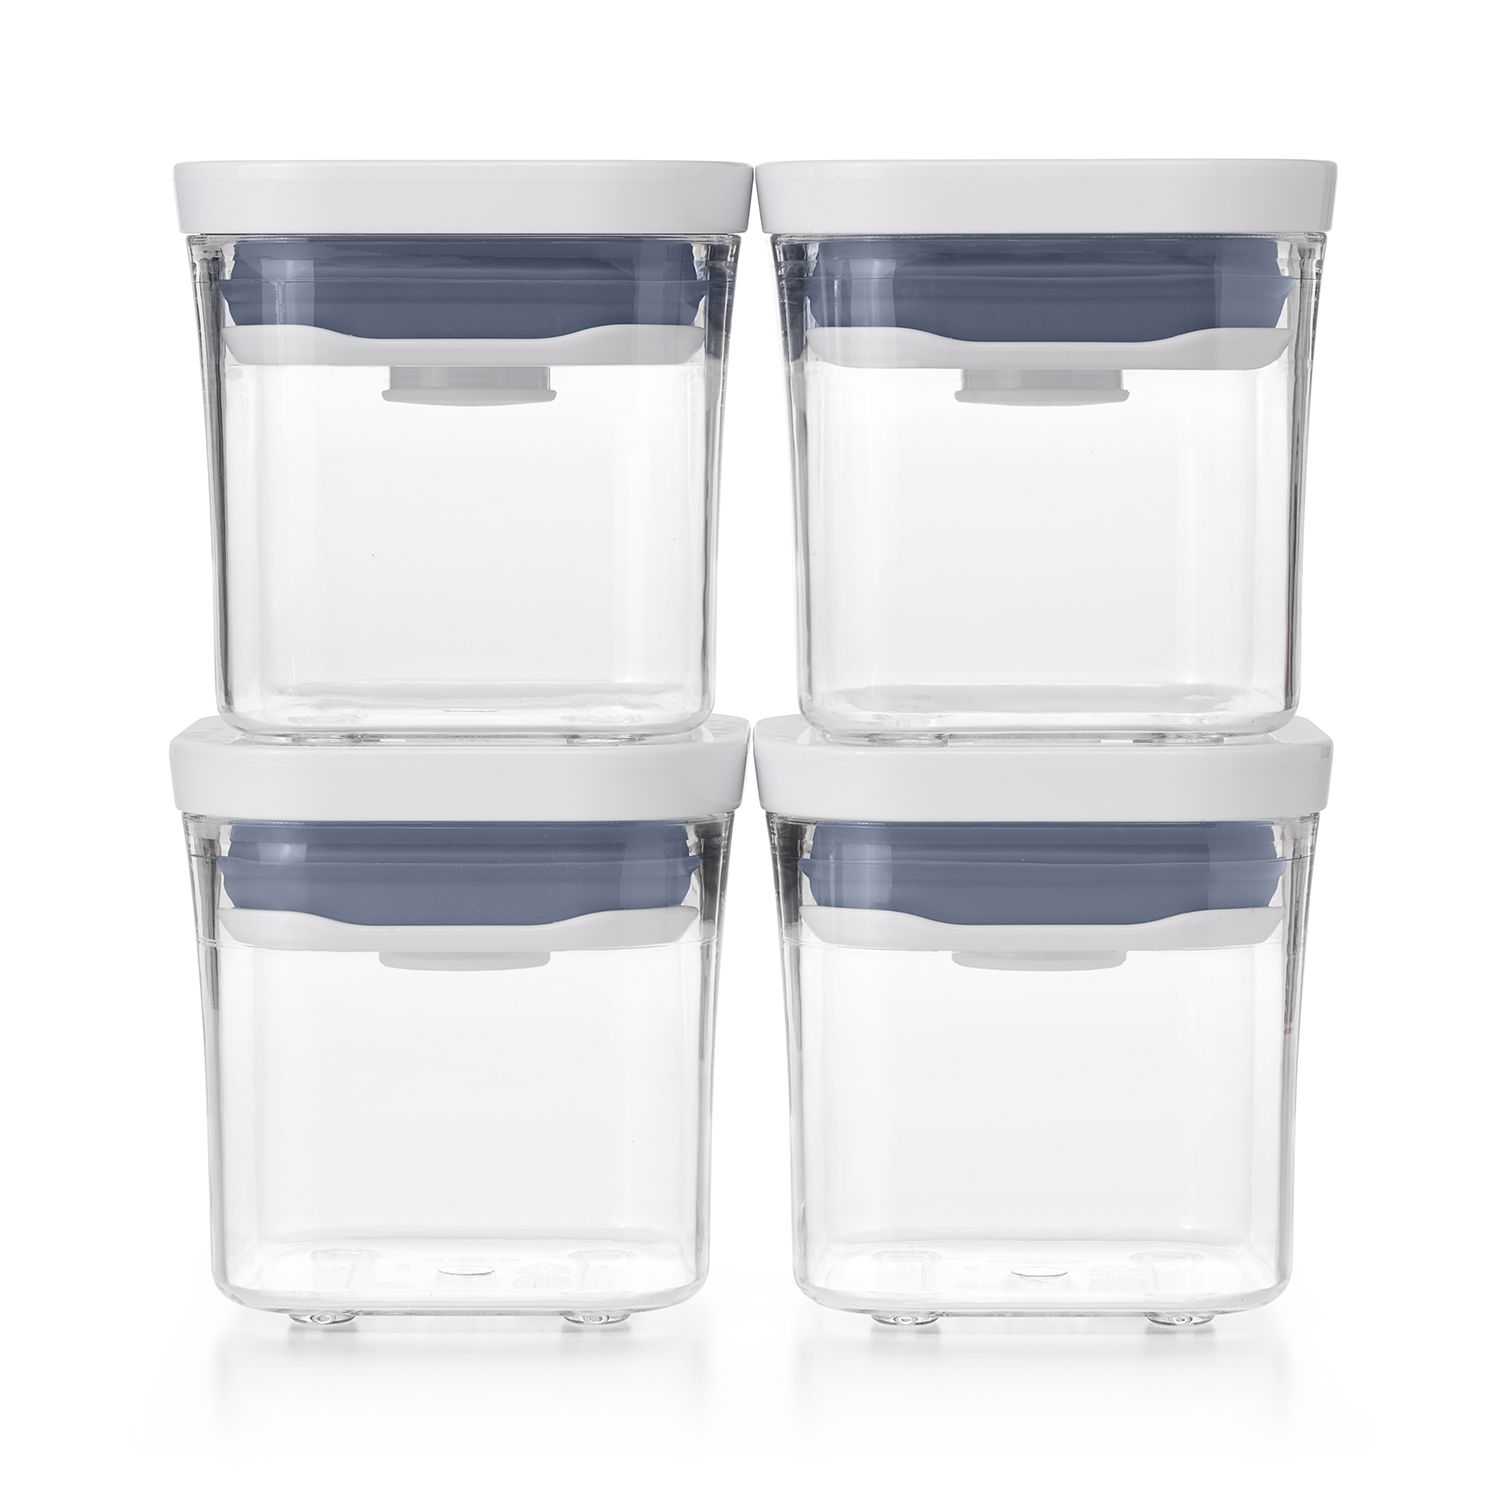 Chef Buddy 10-Piece Glass Food Storage Containers with Snap Lids, Black